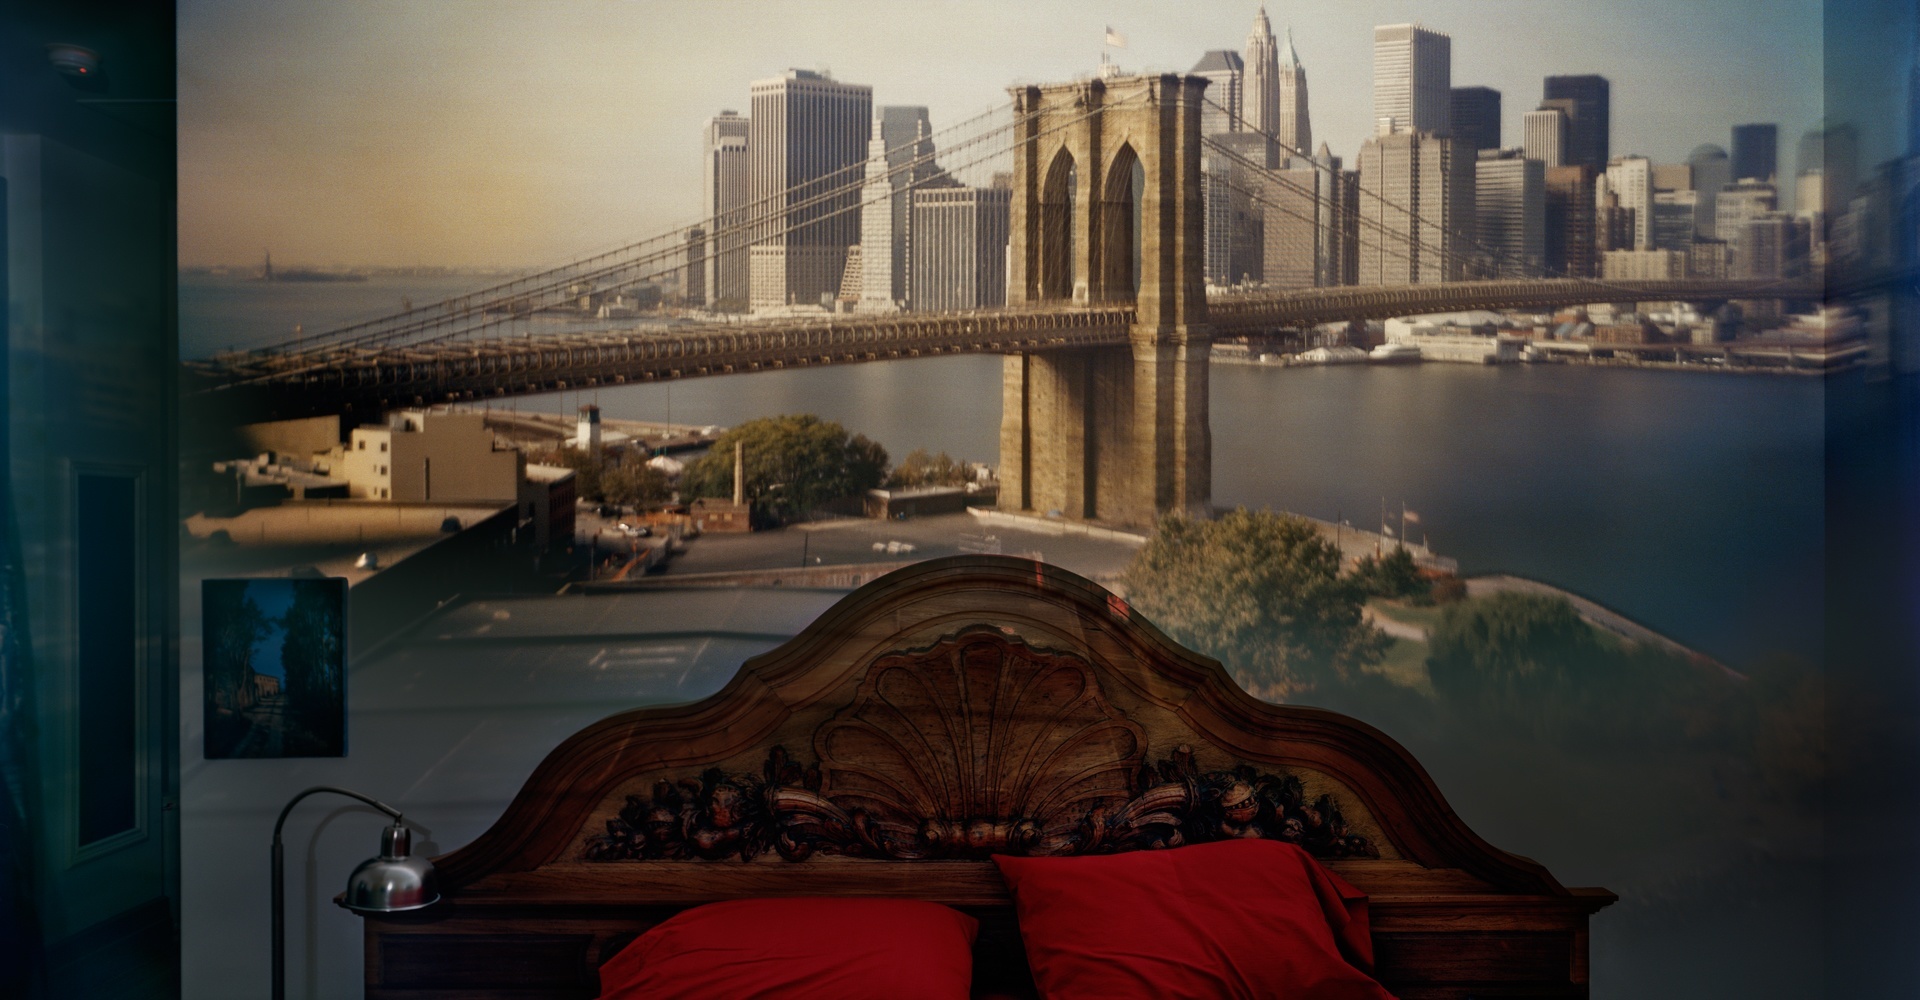 Camera Obscura: View of the Brooklyn Bridge in Bedroom, 2009